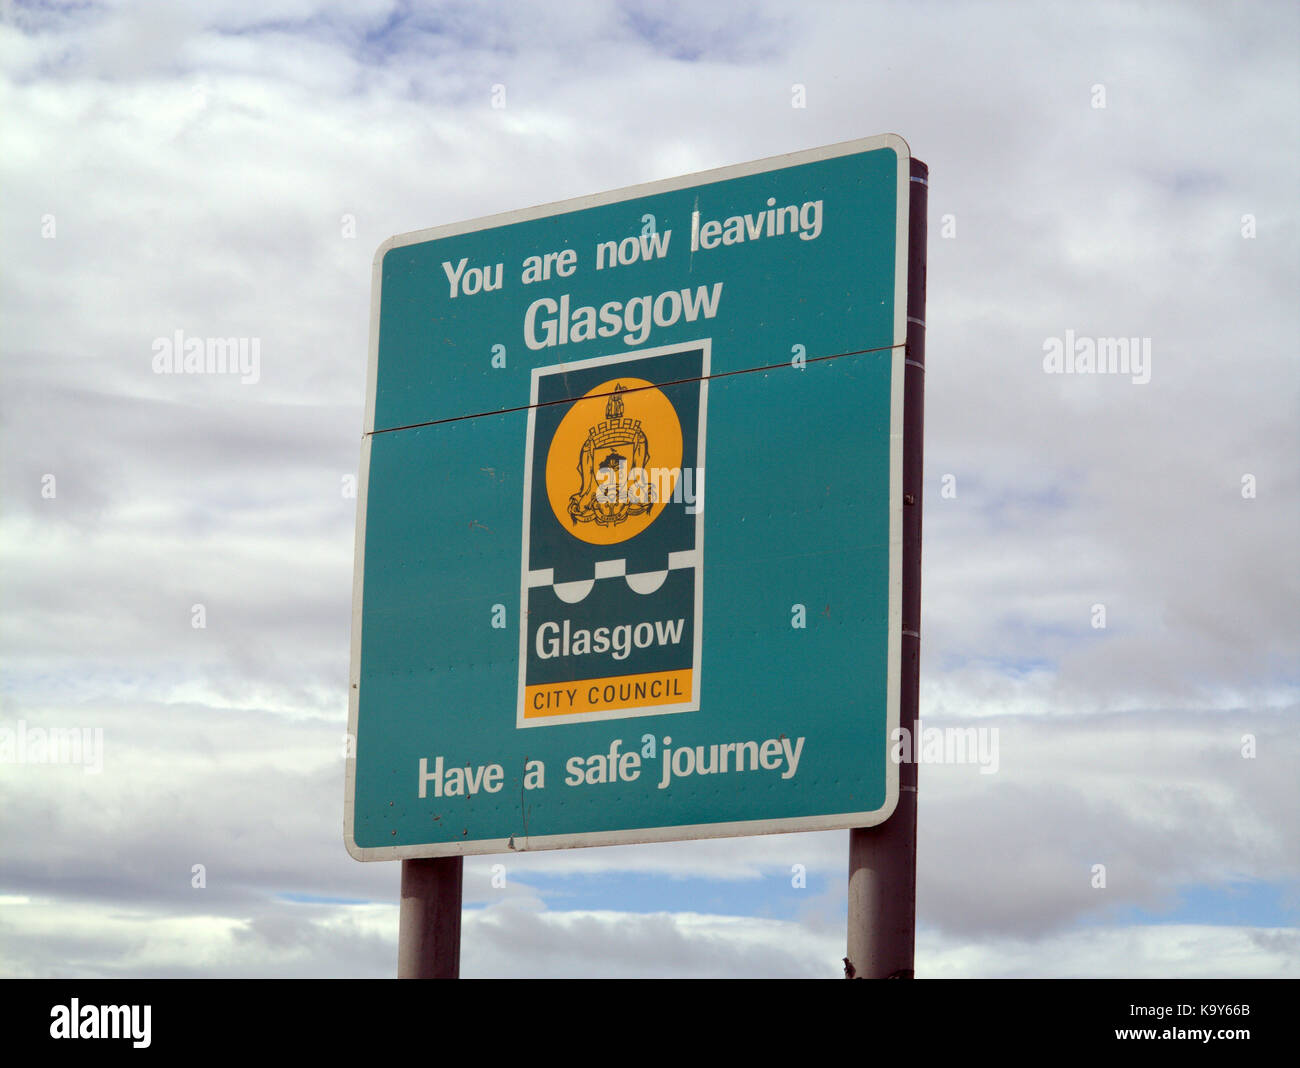 you are now leaving Glasgow sign have a safe journey logo Stock Photo